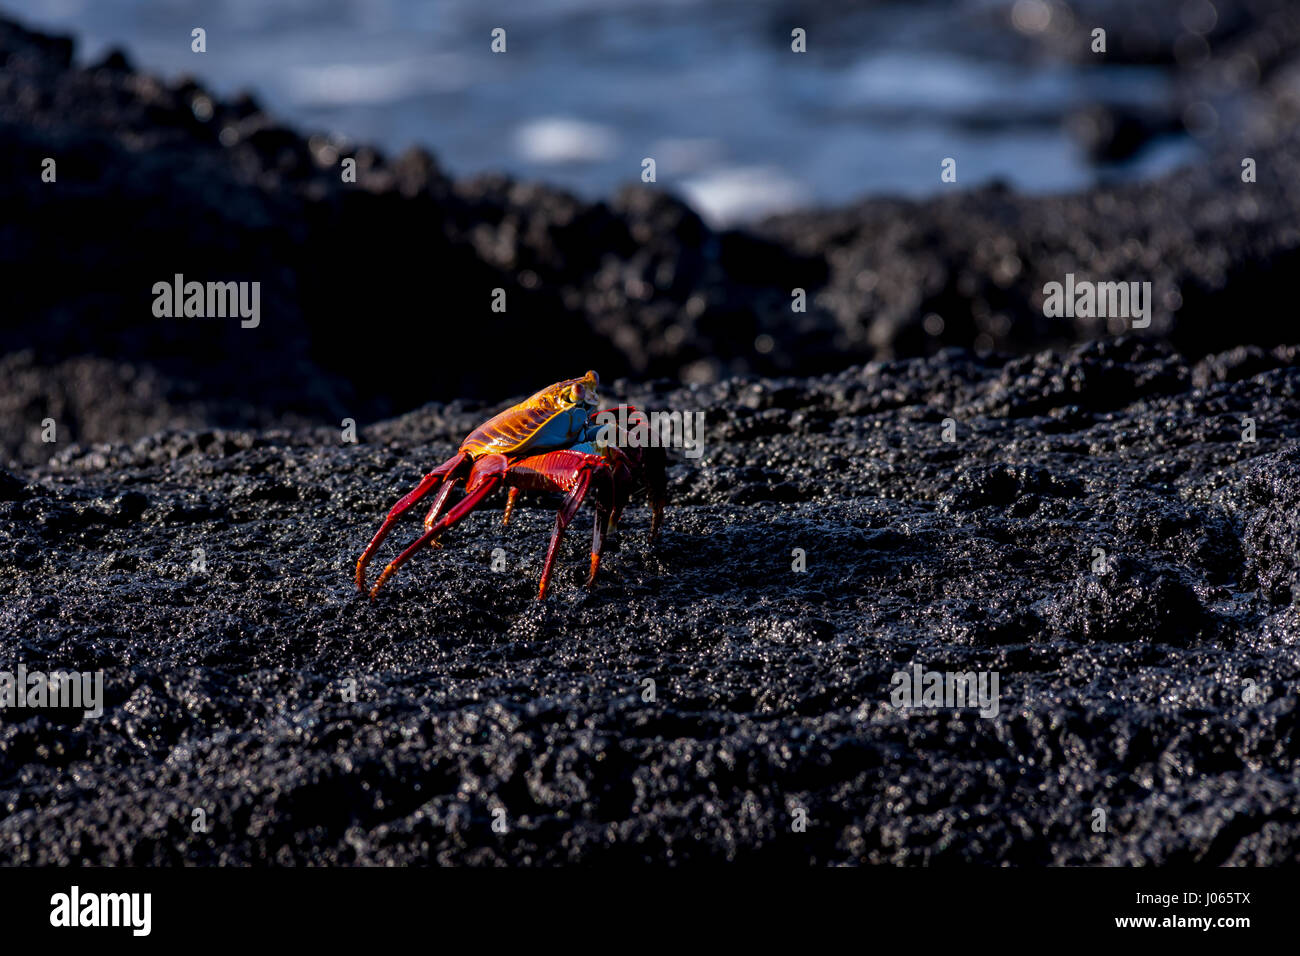 A brilliantly colored sally lightfoot crab (Grapsus grapsus) walks across the lava rock along the shore in the Galapagos Islands. Stock Photo